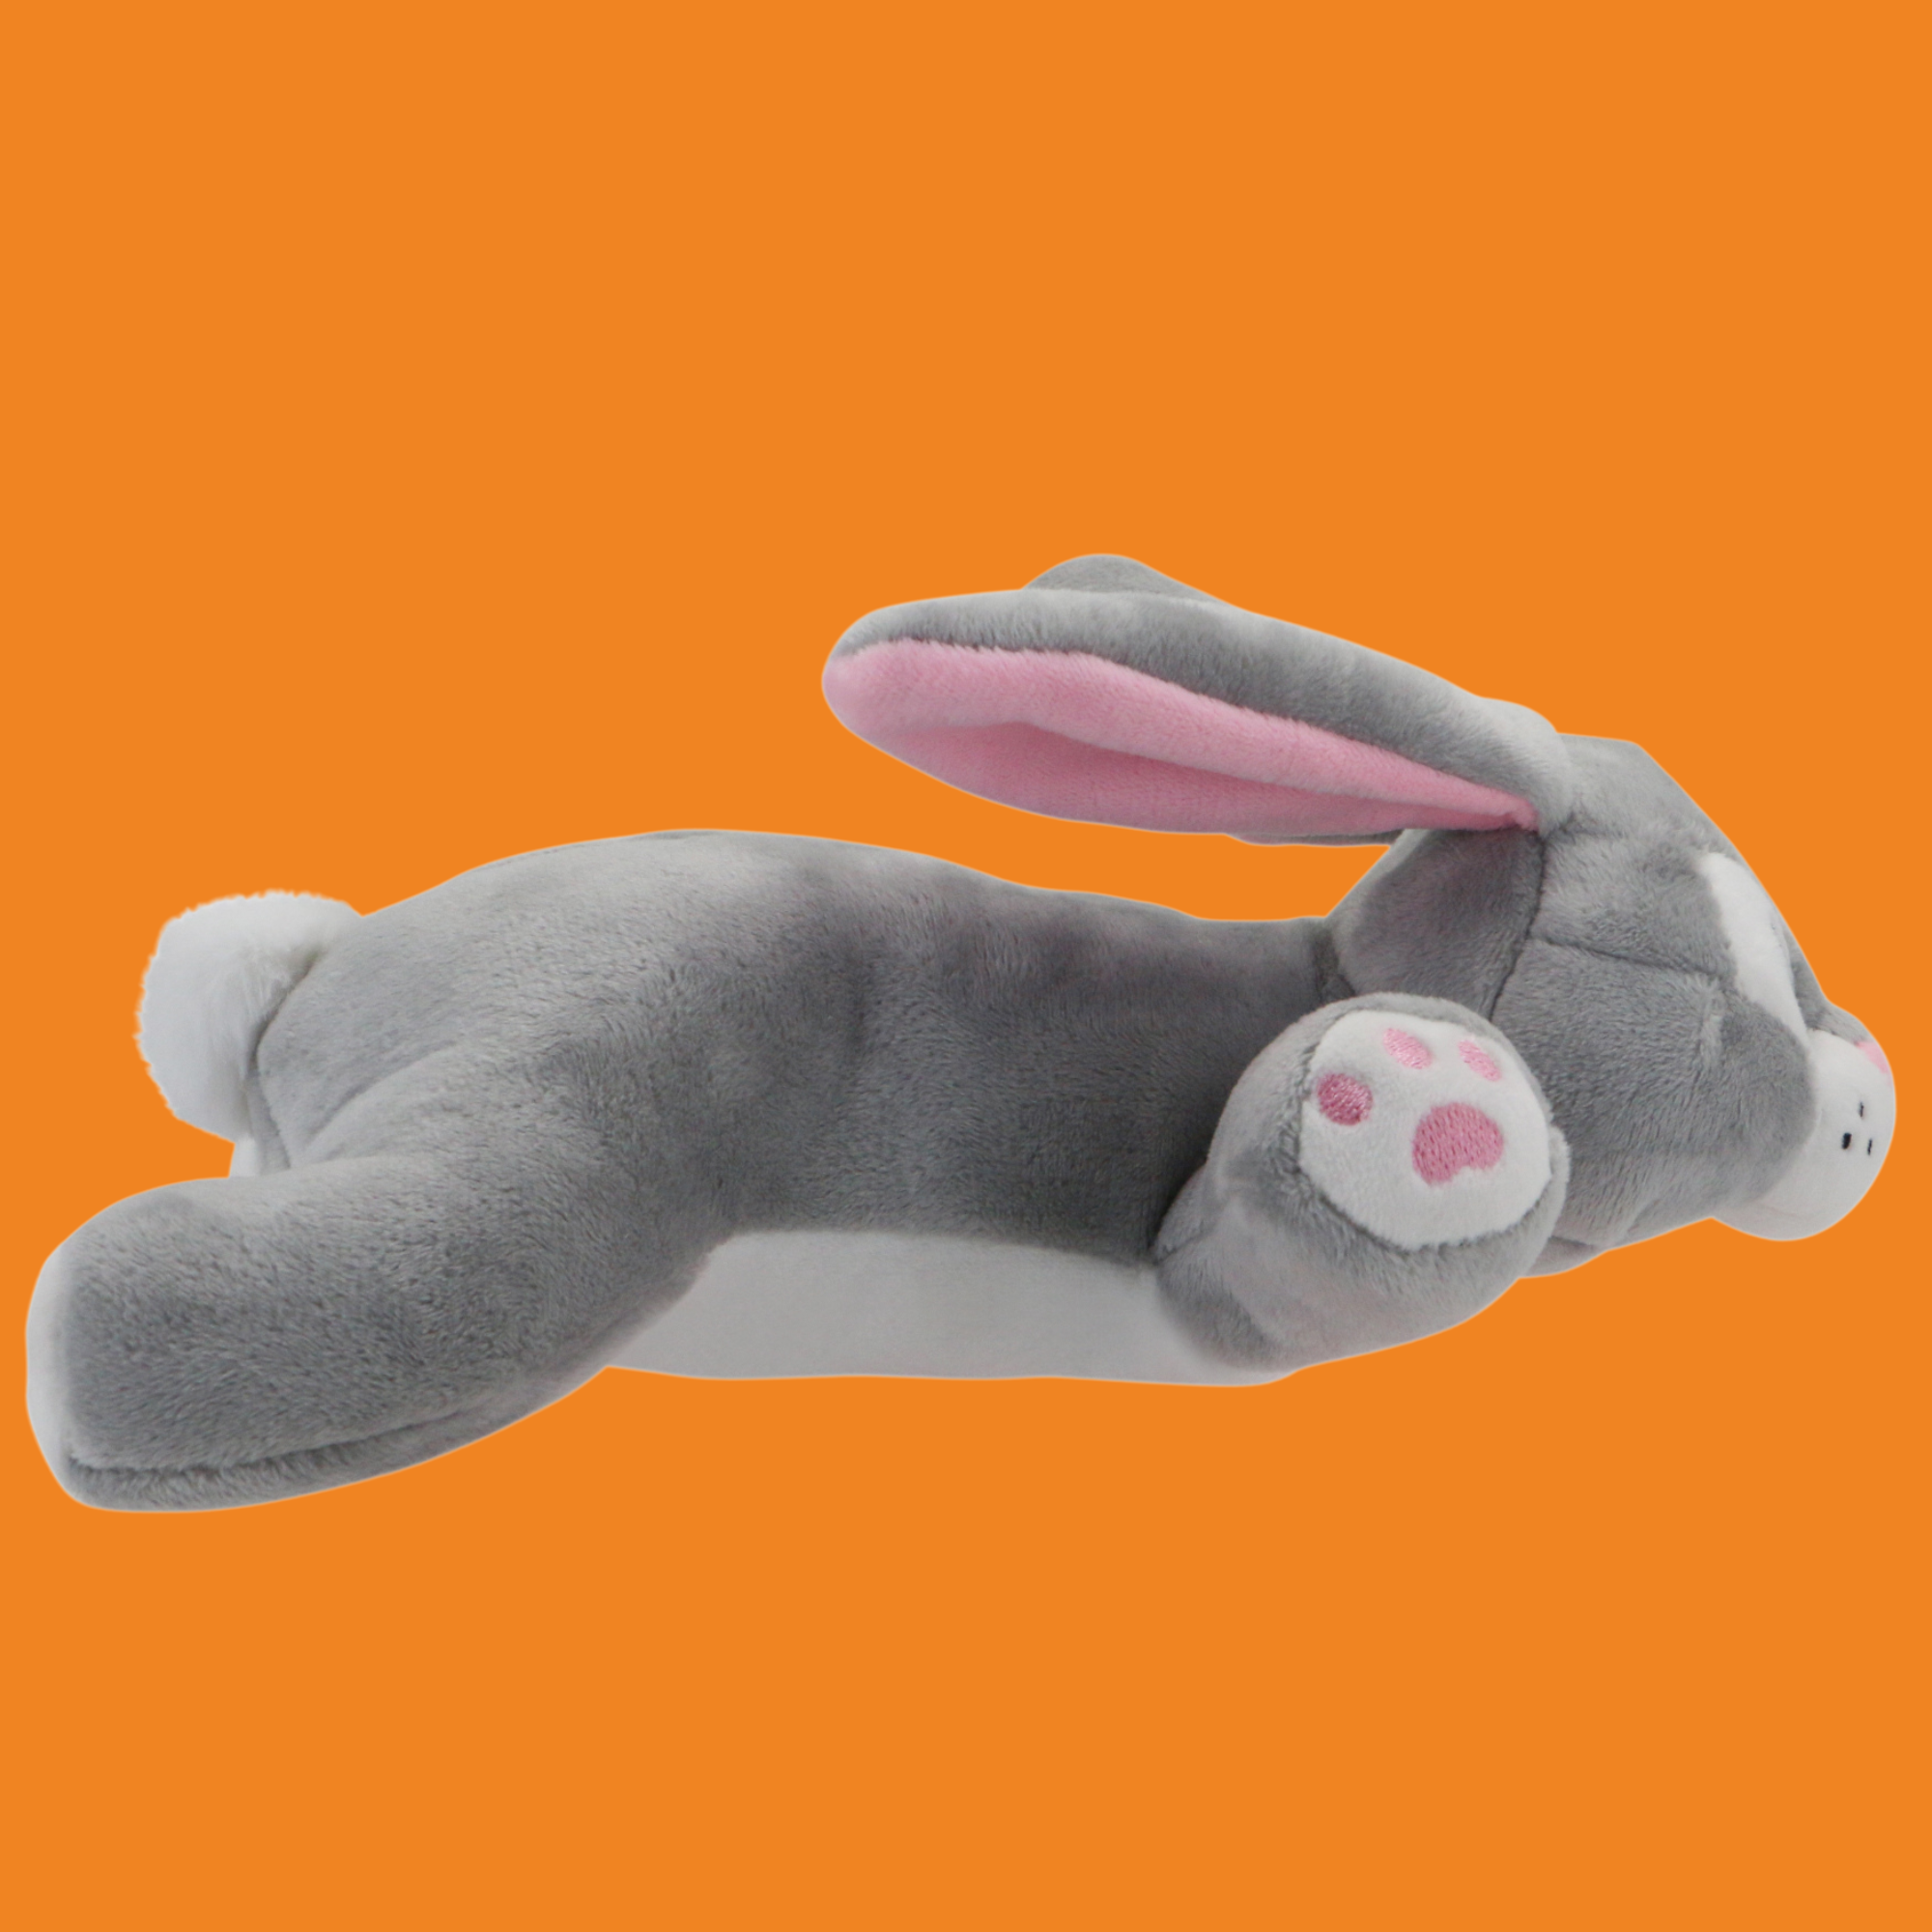 Sprouts - Fat Garden Rabbit - Stuffed Animal Dog Toy